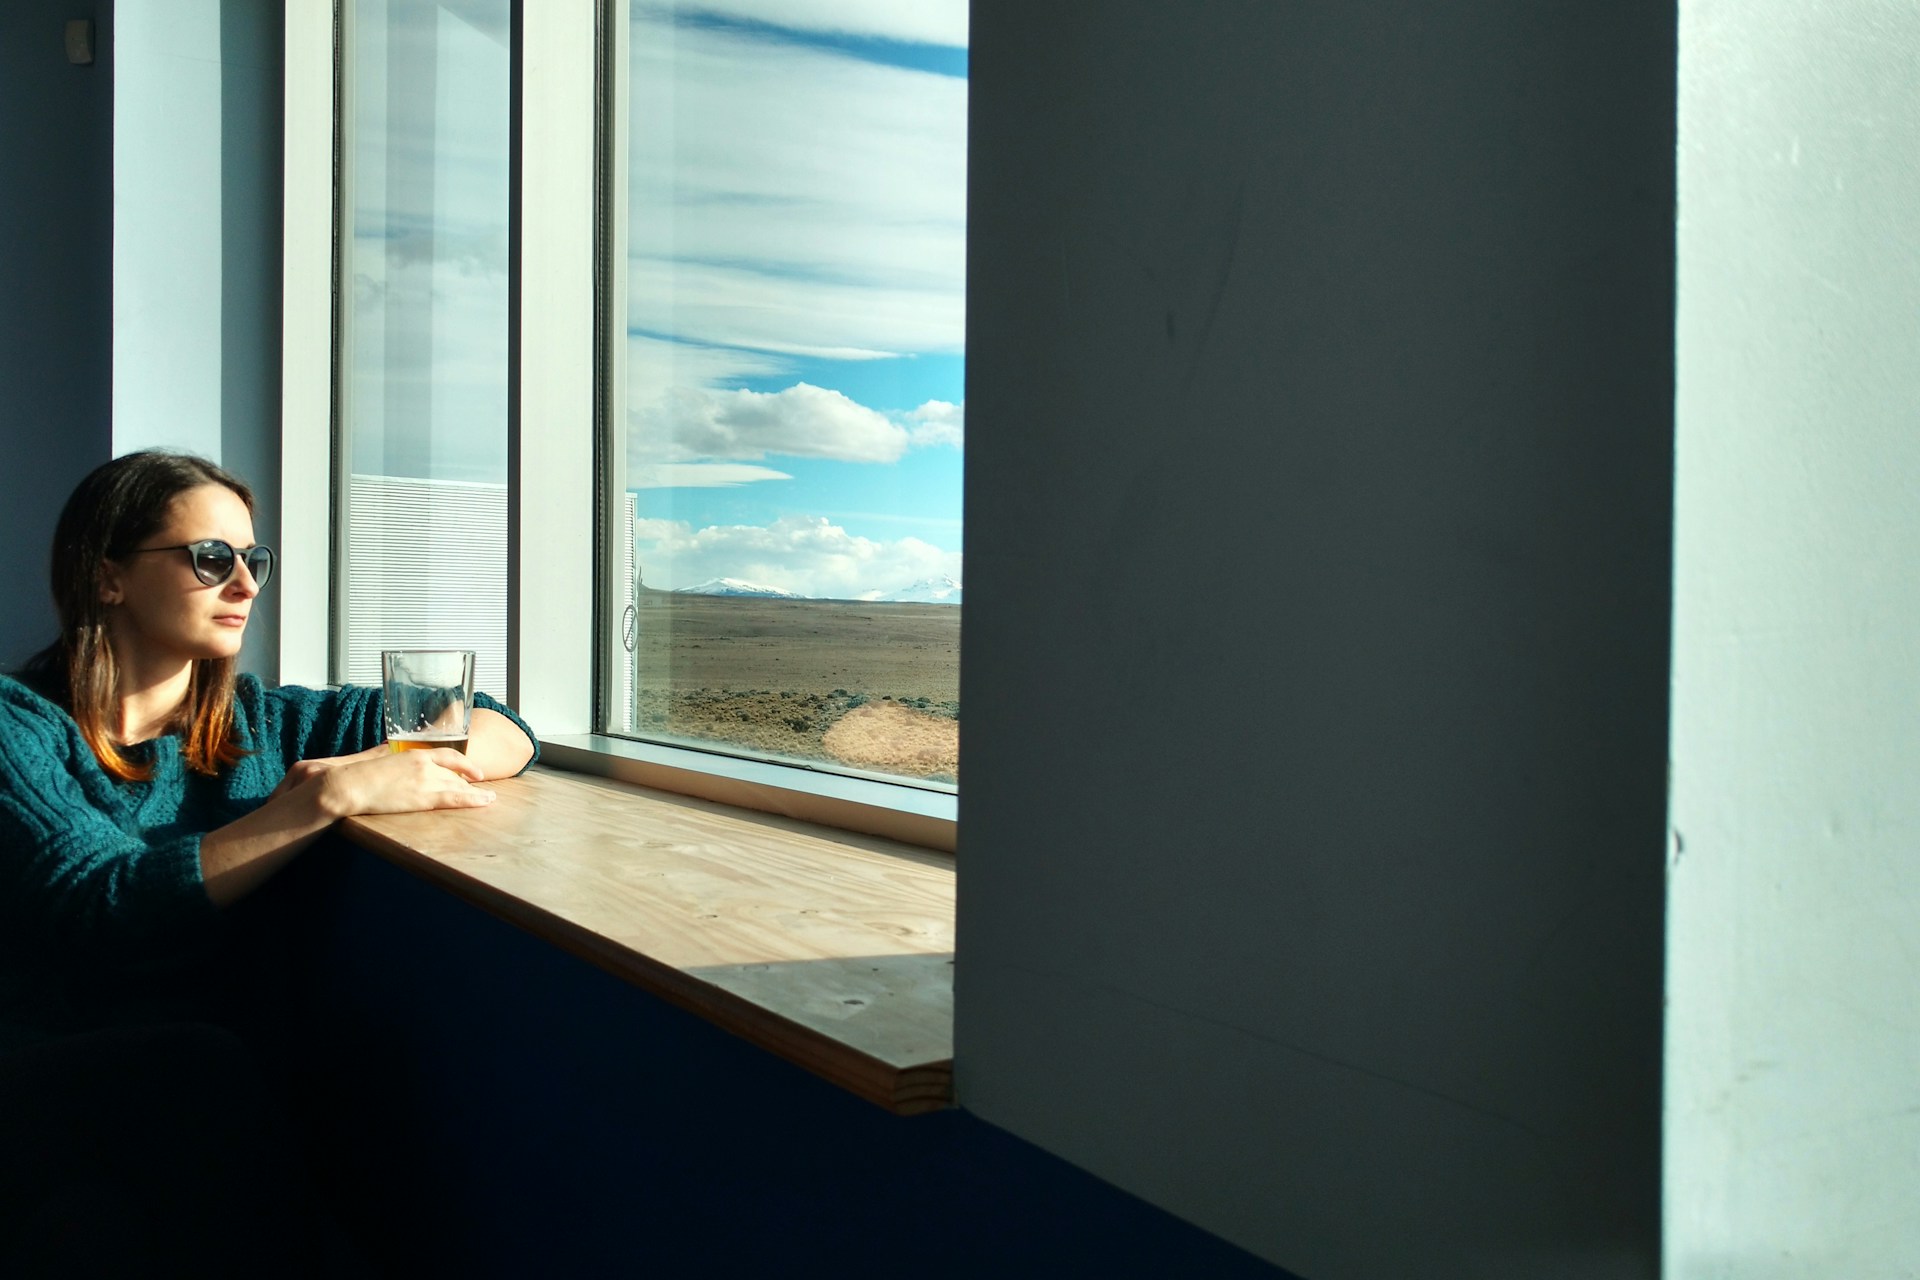 woman sitting beside window while looking outside